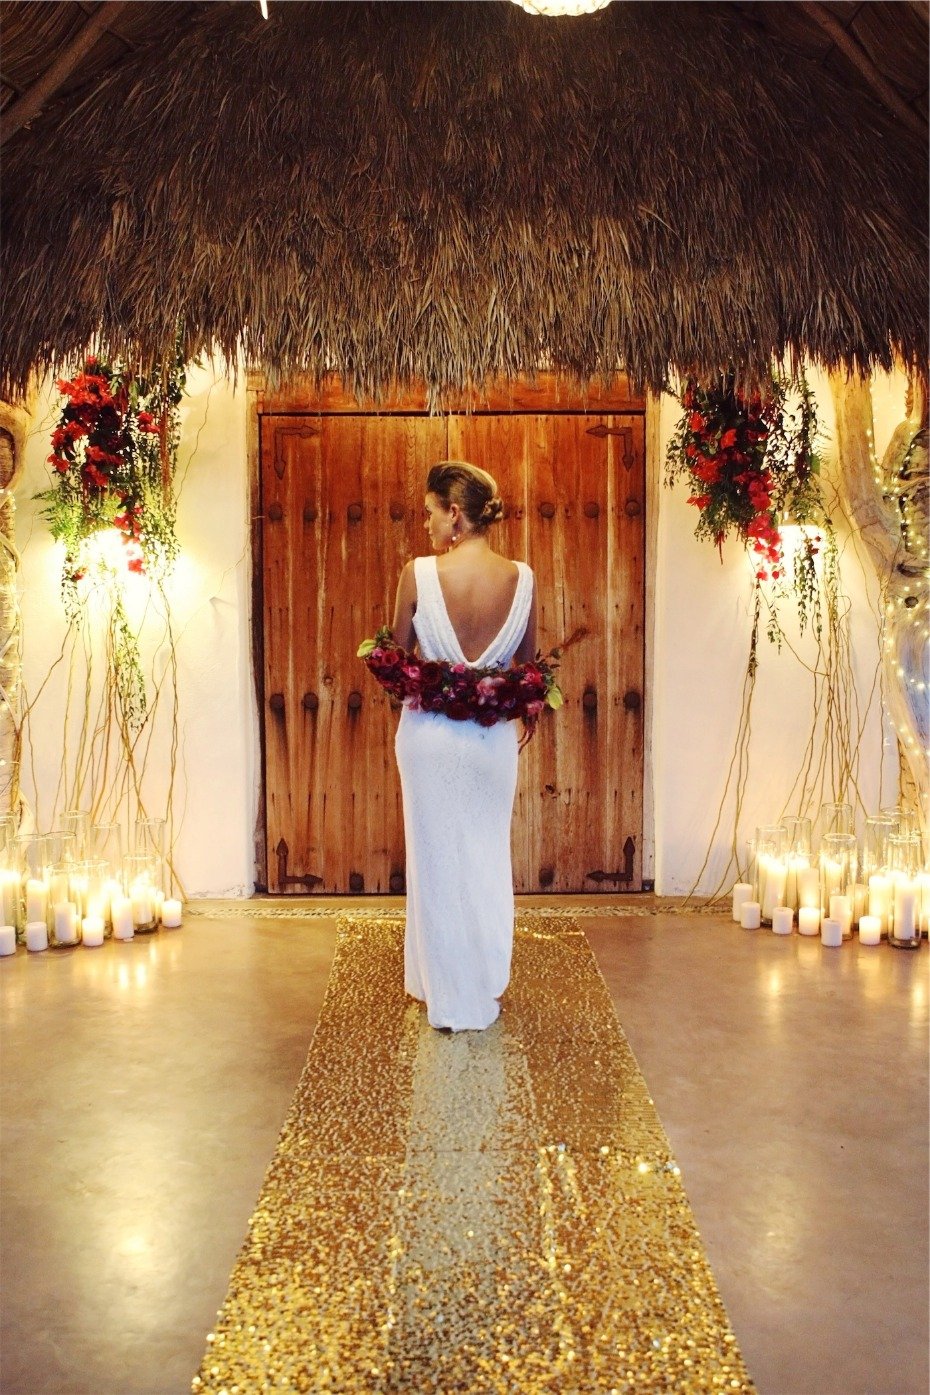 tropical and glamorous candle lit wedding ceremony in Mexico